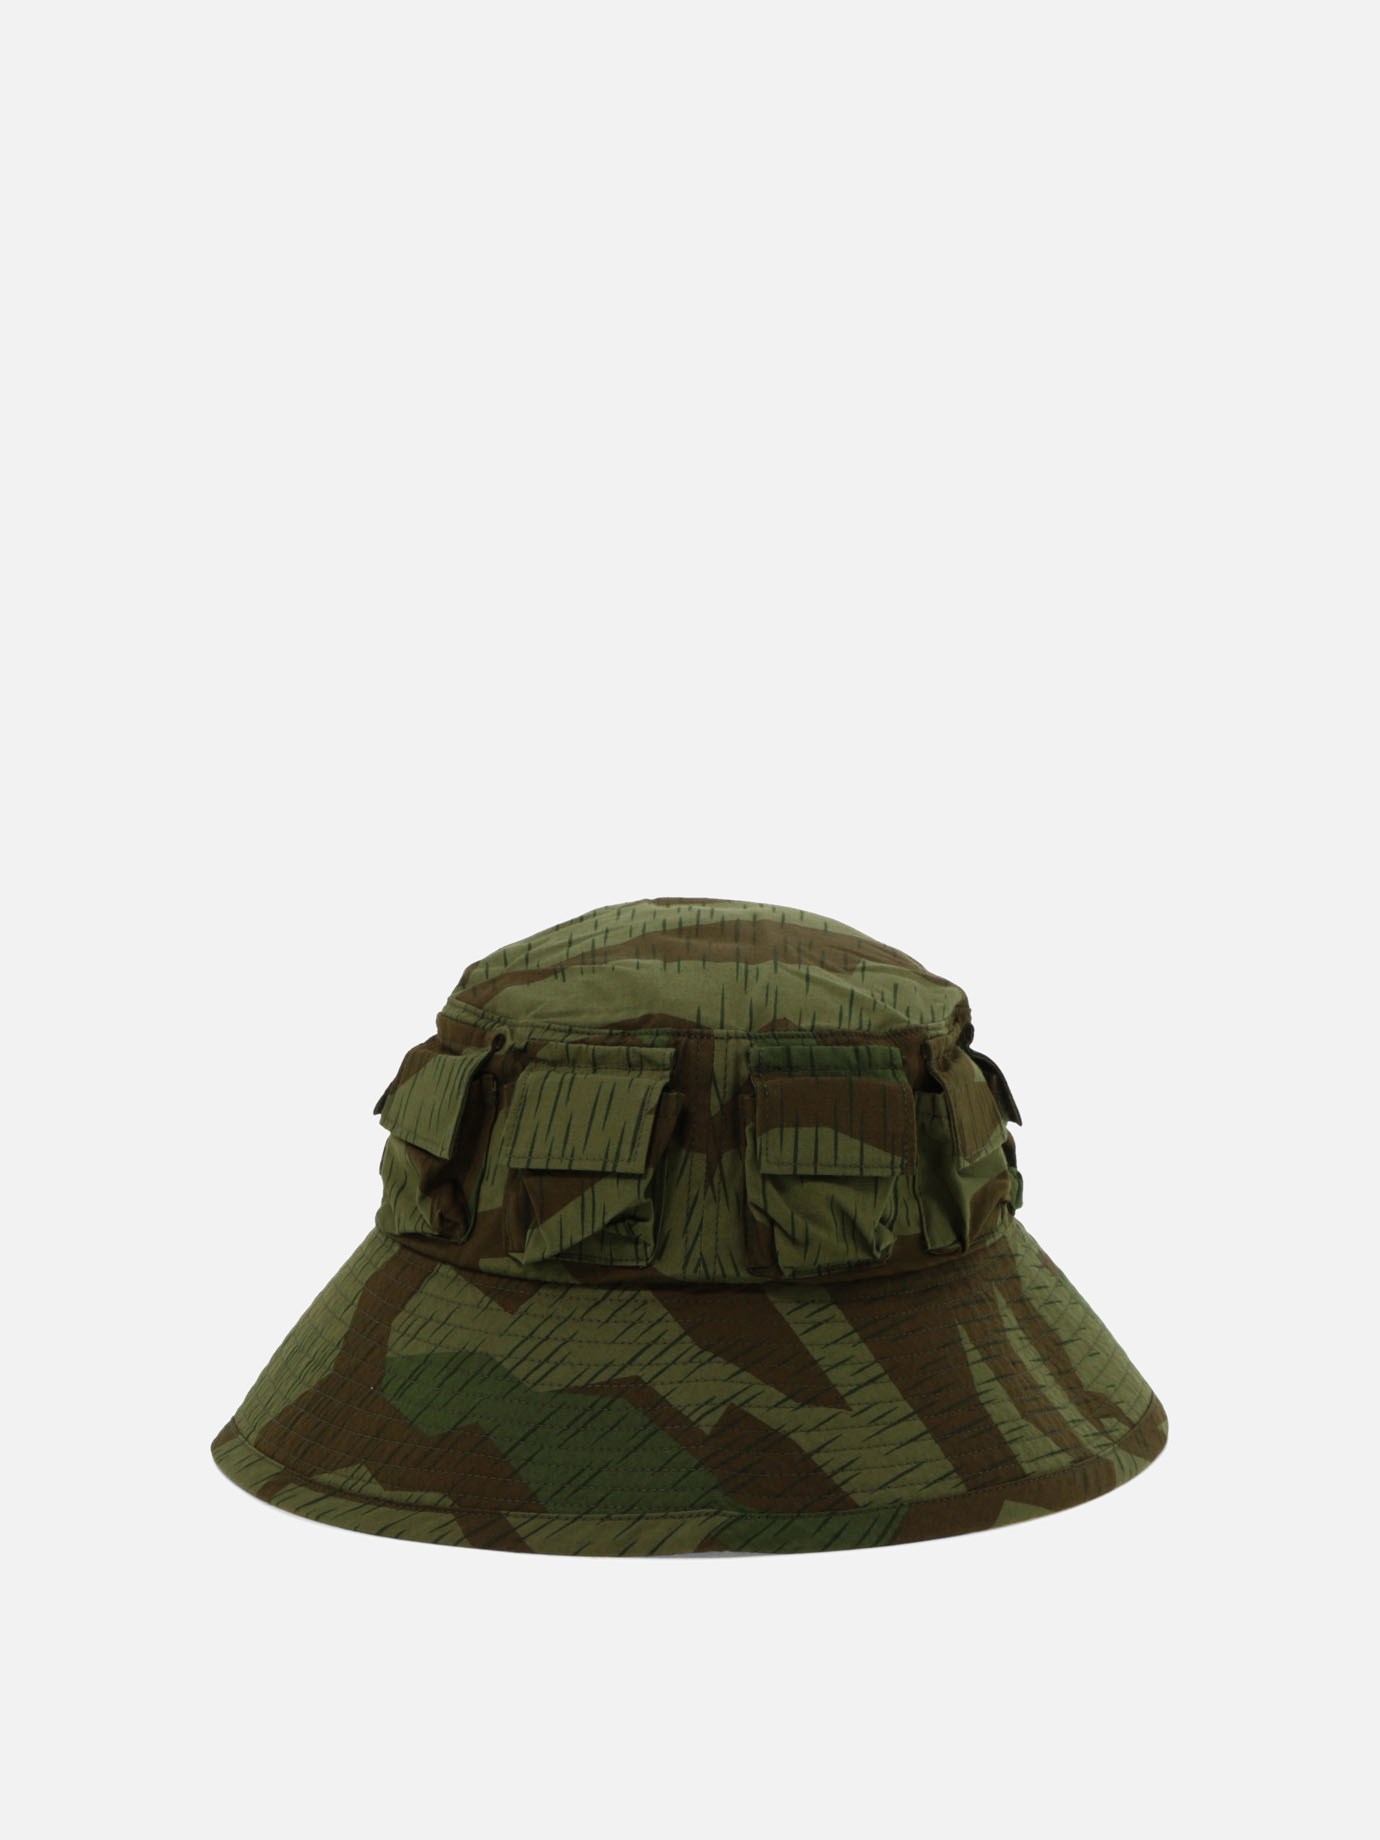  Boonie  bucket hatby Mountain Research - 3